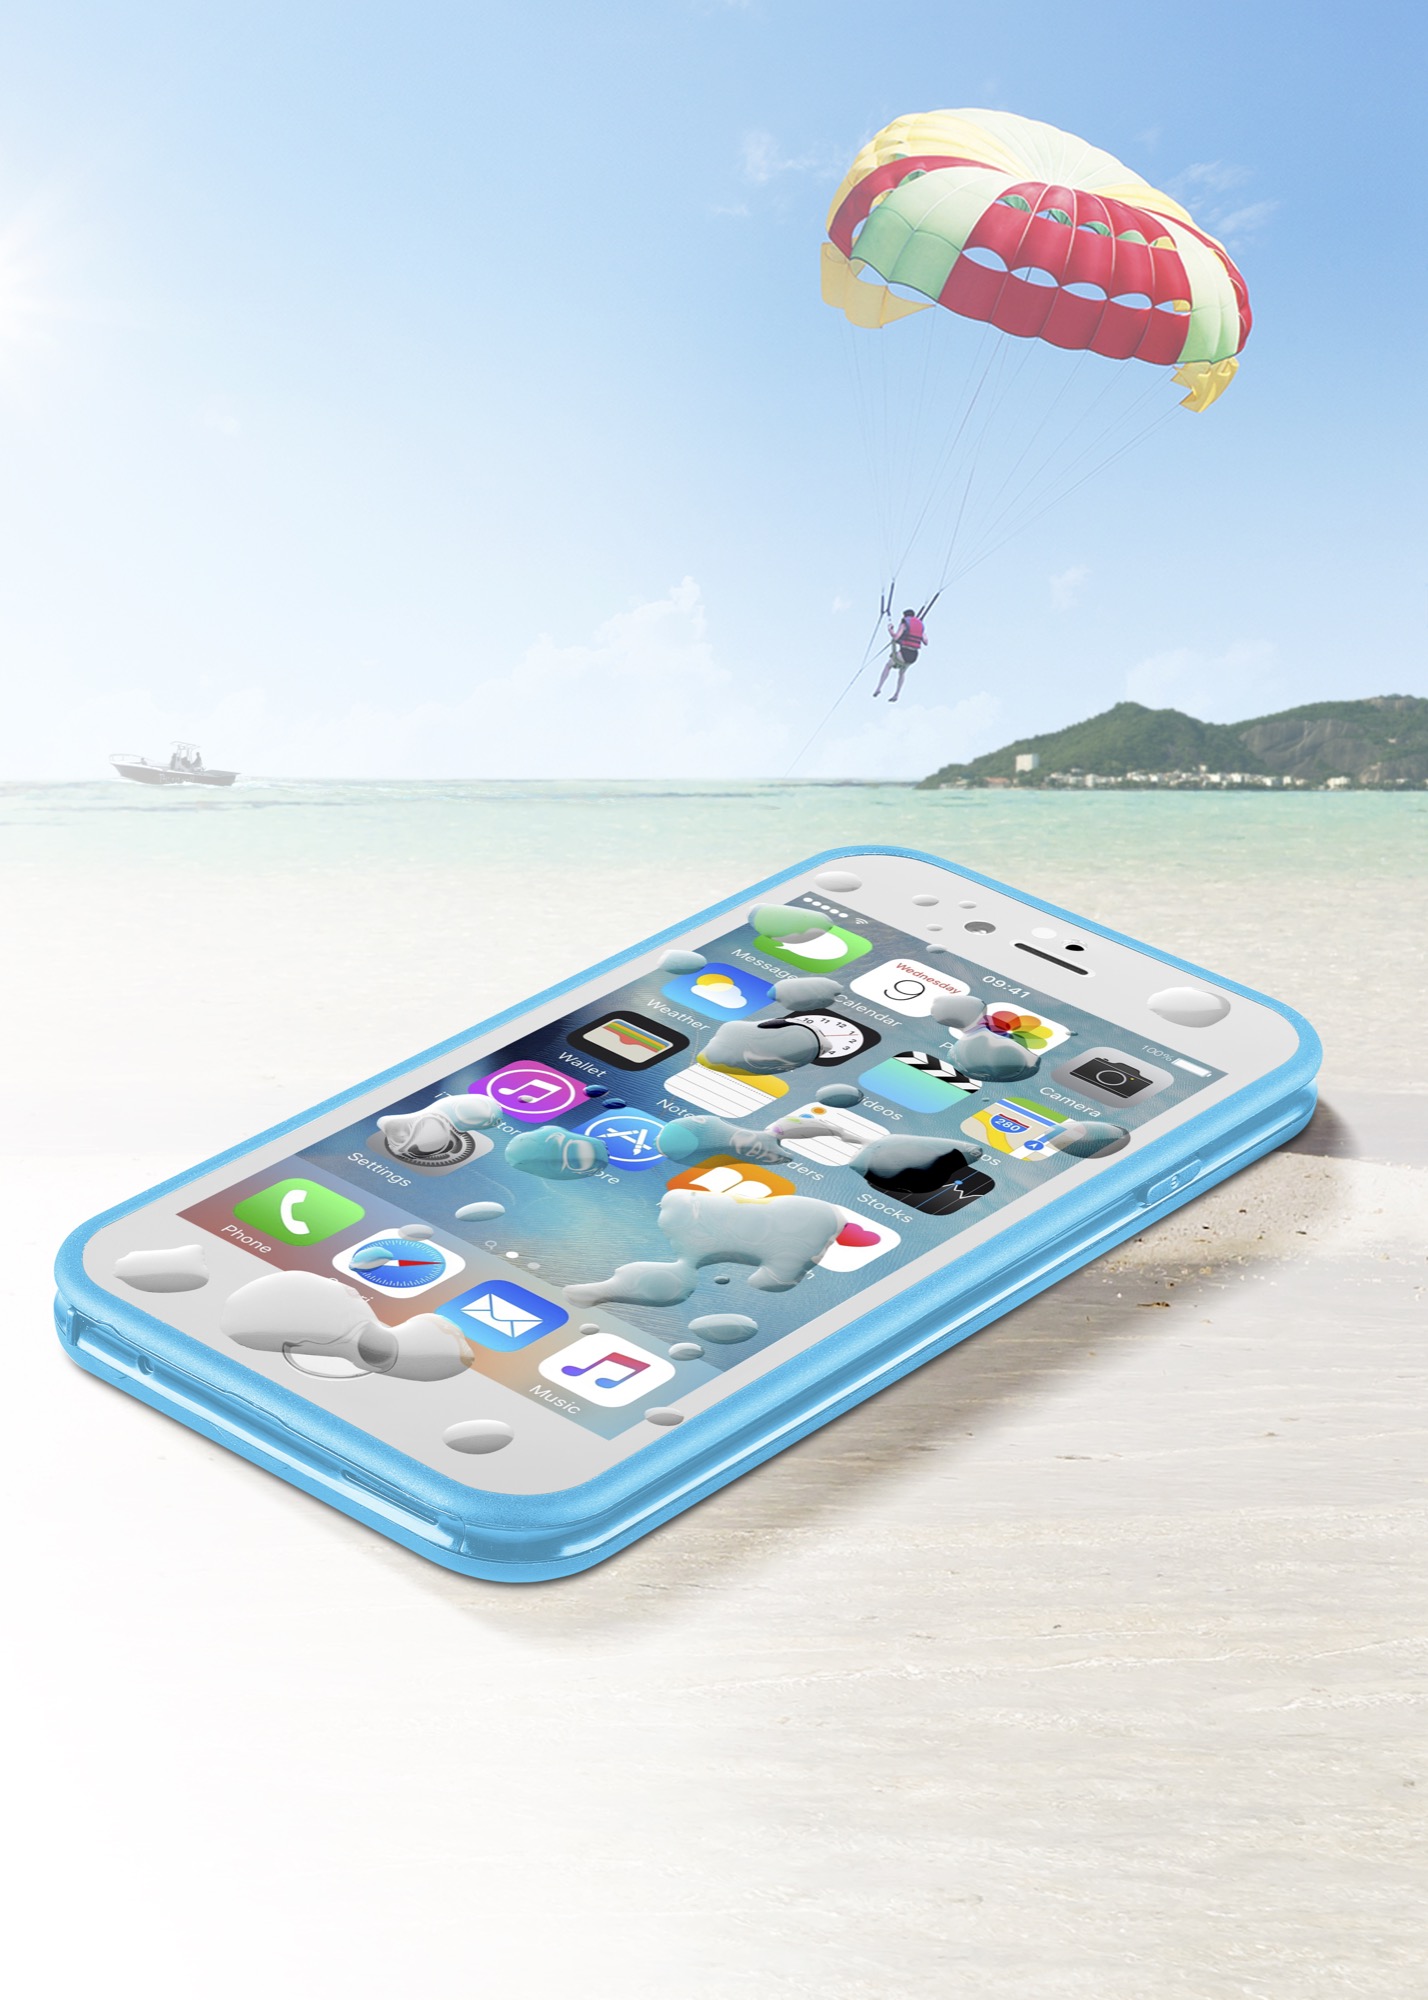 Voyager compact, iPhone 6, waterproof IPx6, blue